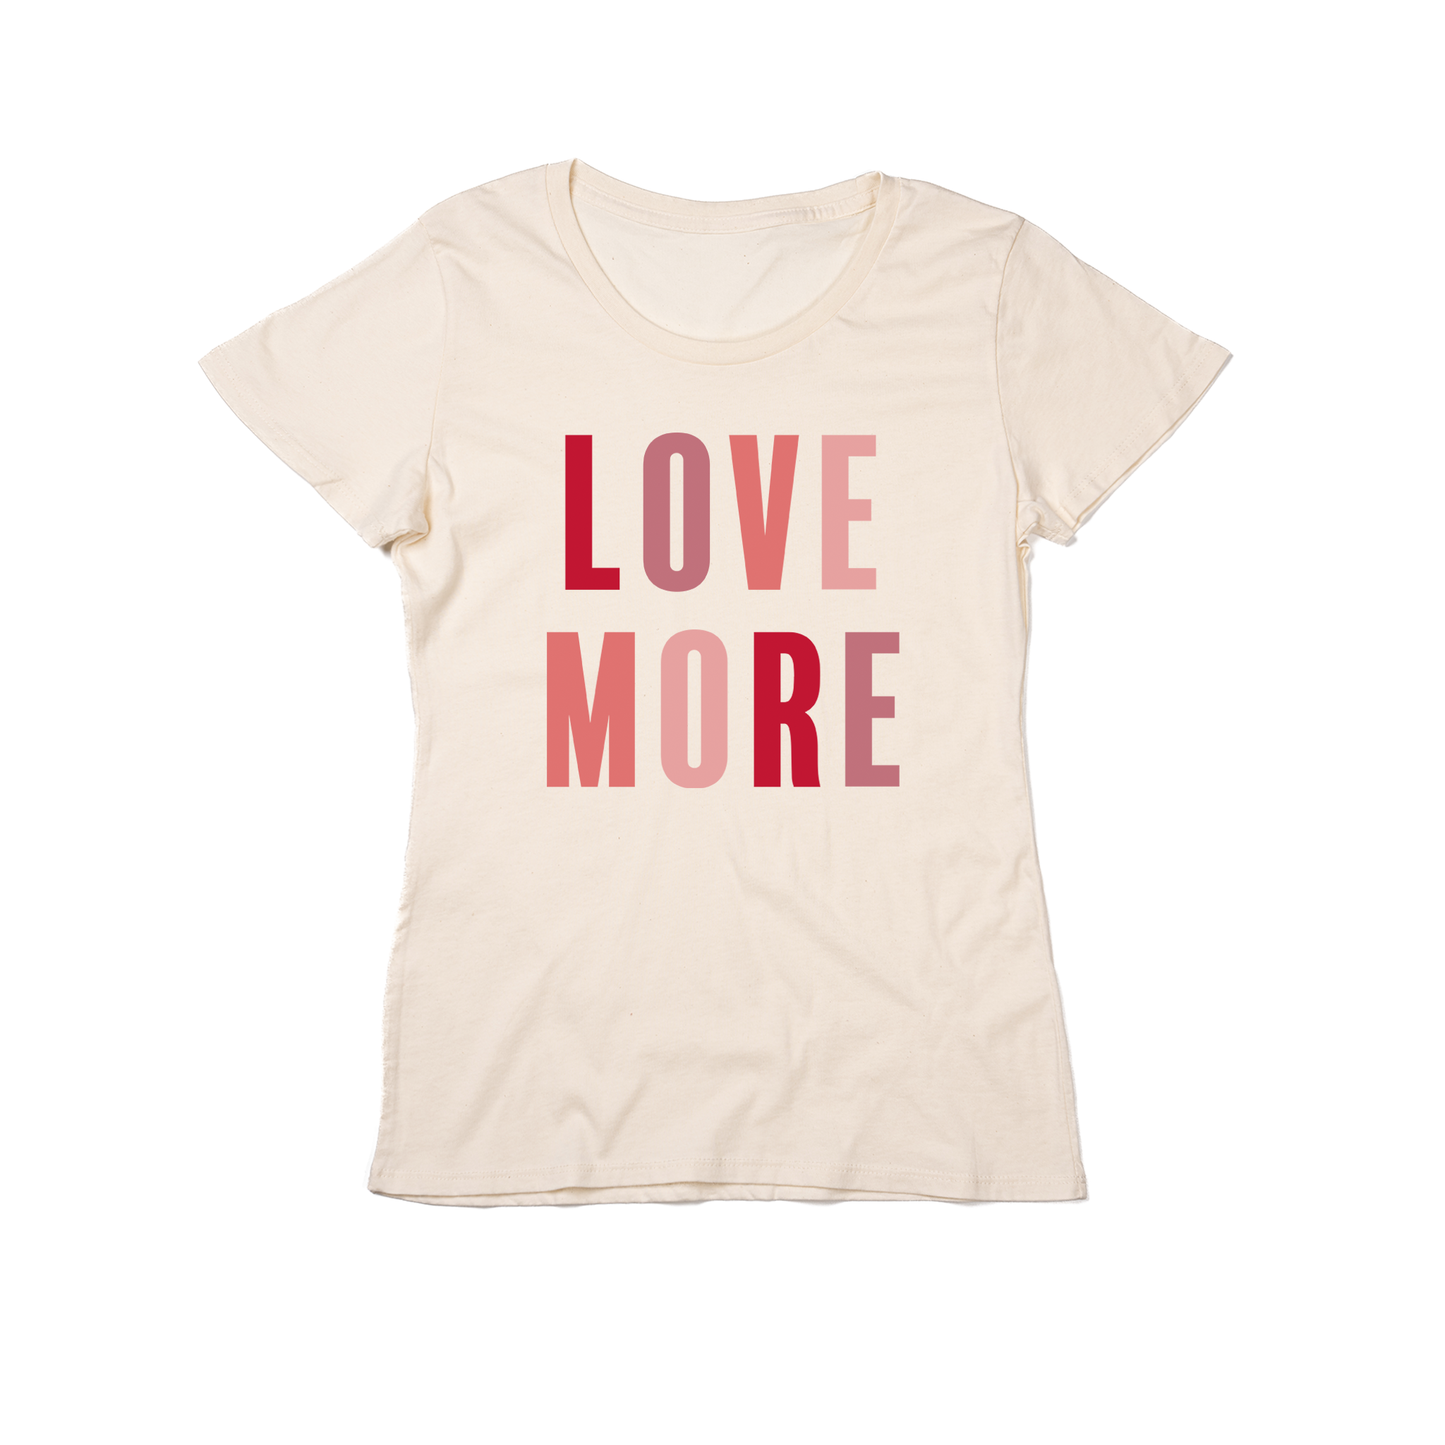 Love More (Across Front) - Women's Fitted Tee (Natural)